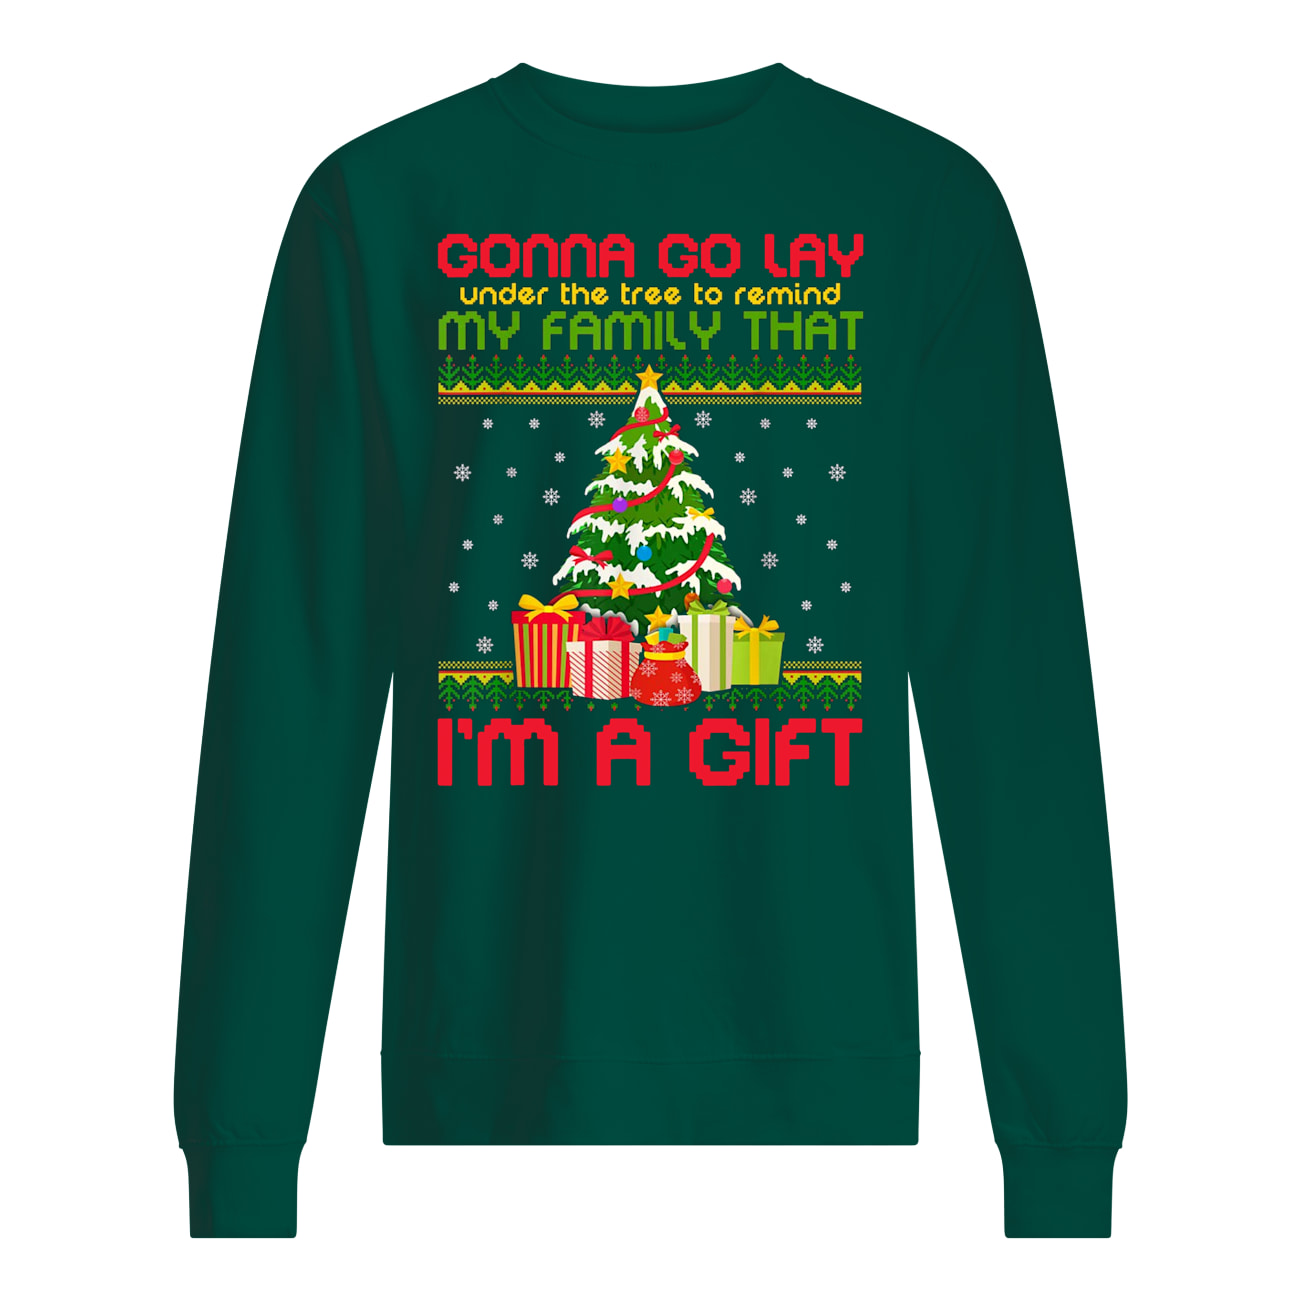 Gonna go lay under the tree to remind my family that i'm a gift ugly christmas sweatshirt